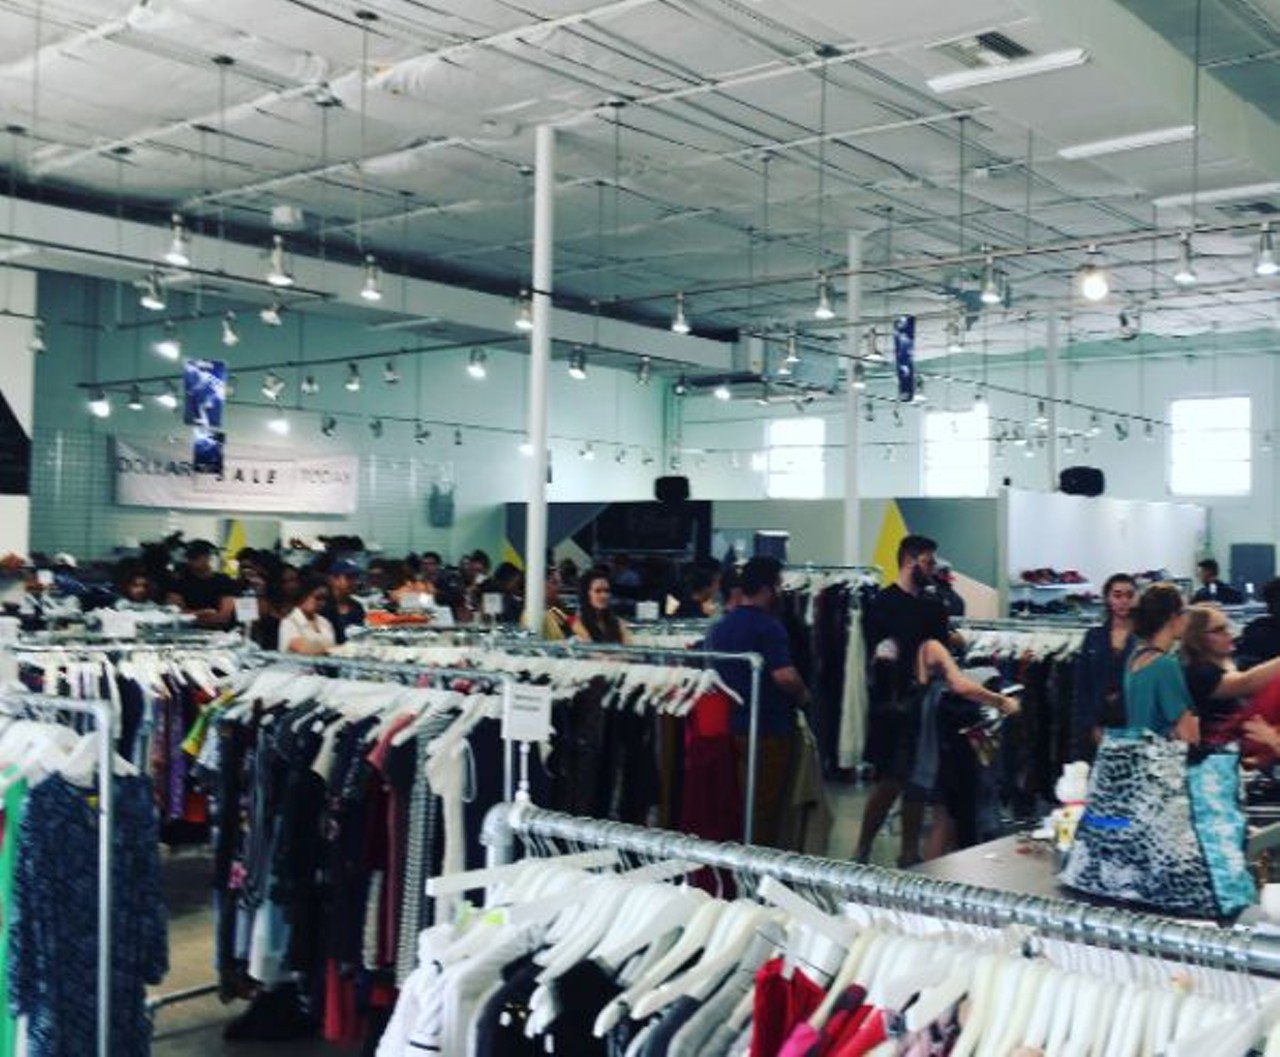 20 Best Thrift, Vintage, and Consignment Shops in Austin - Austin